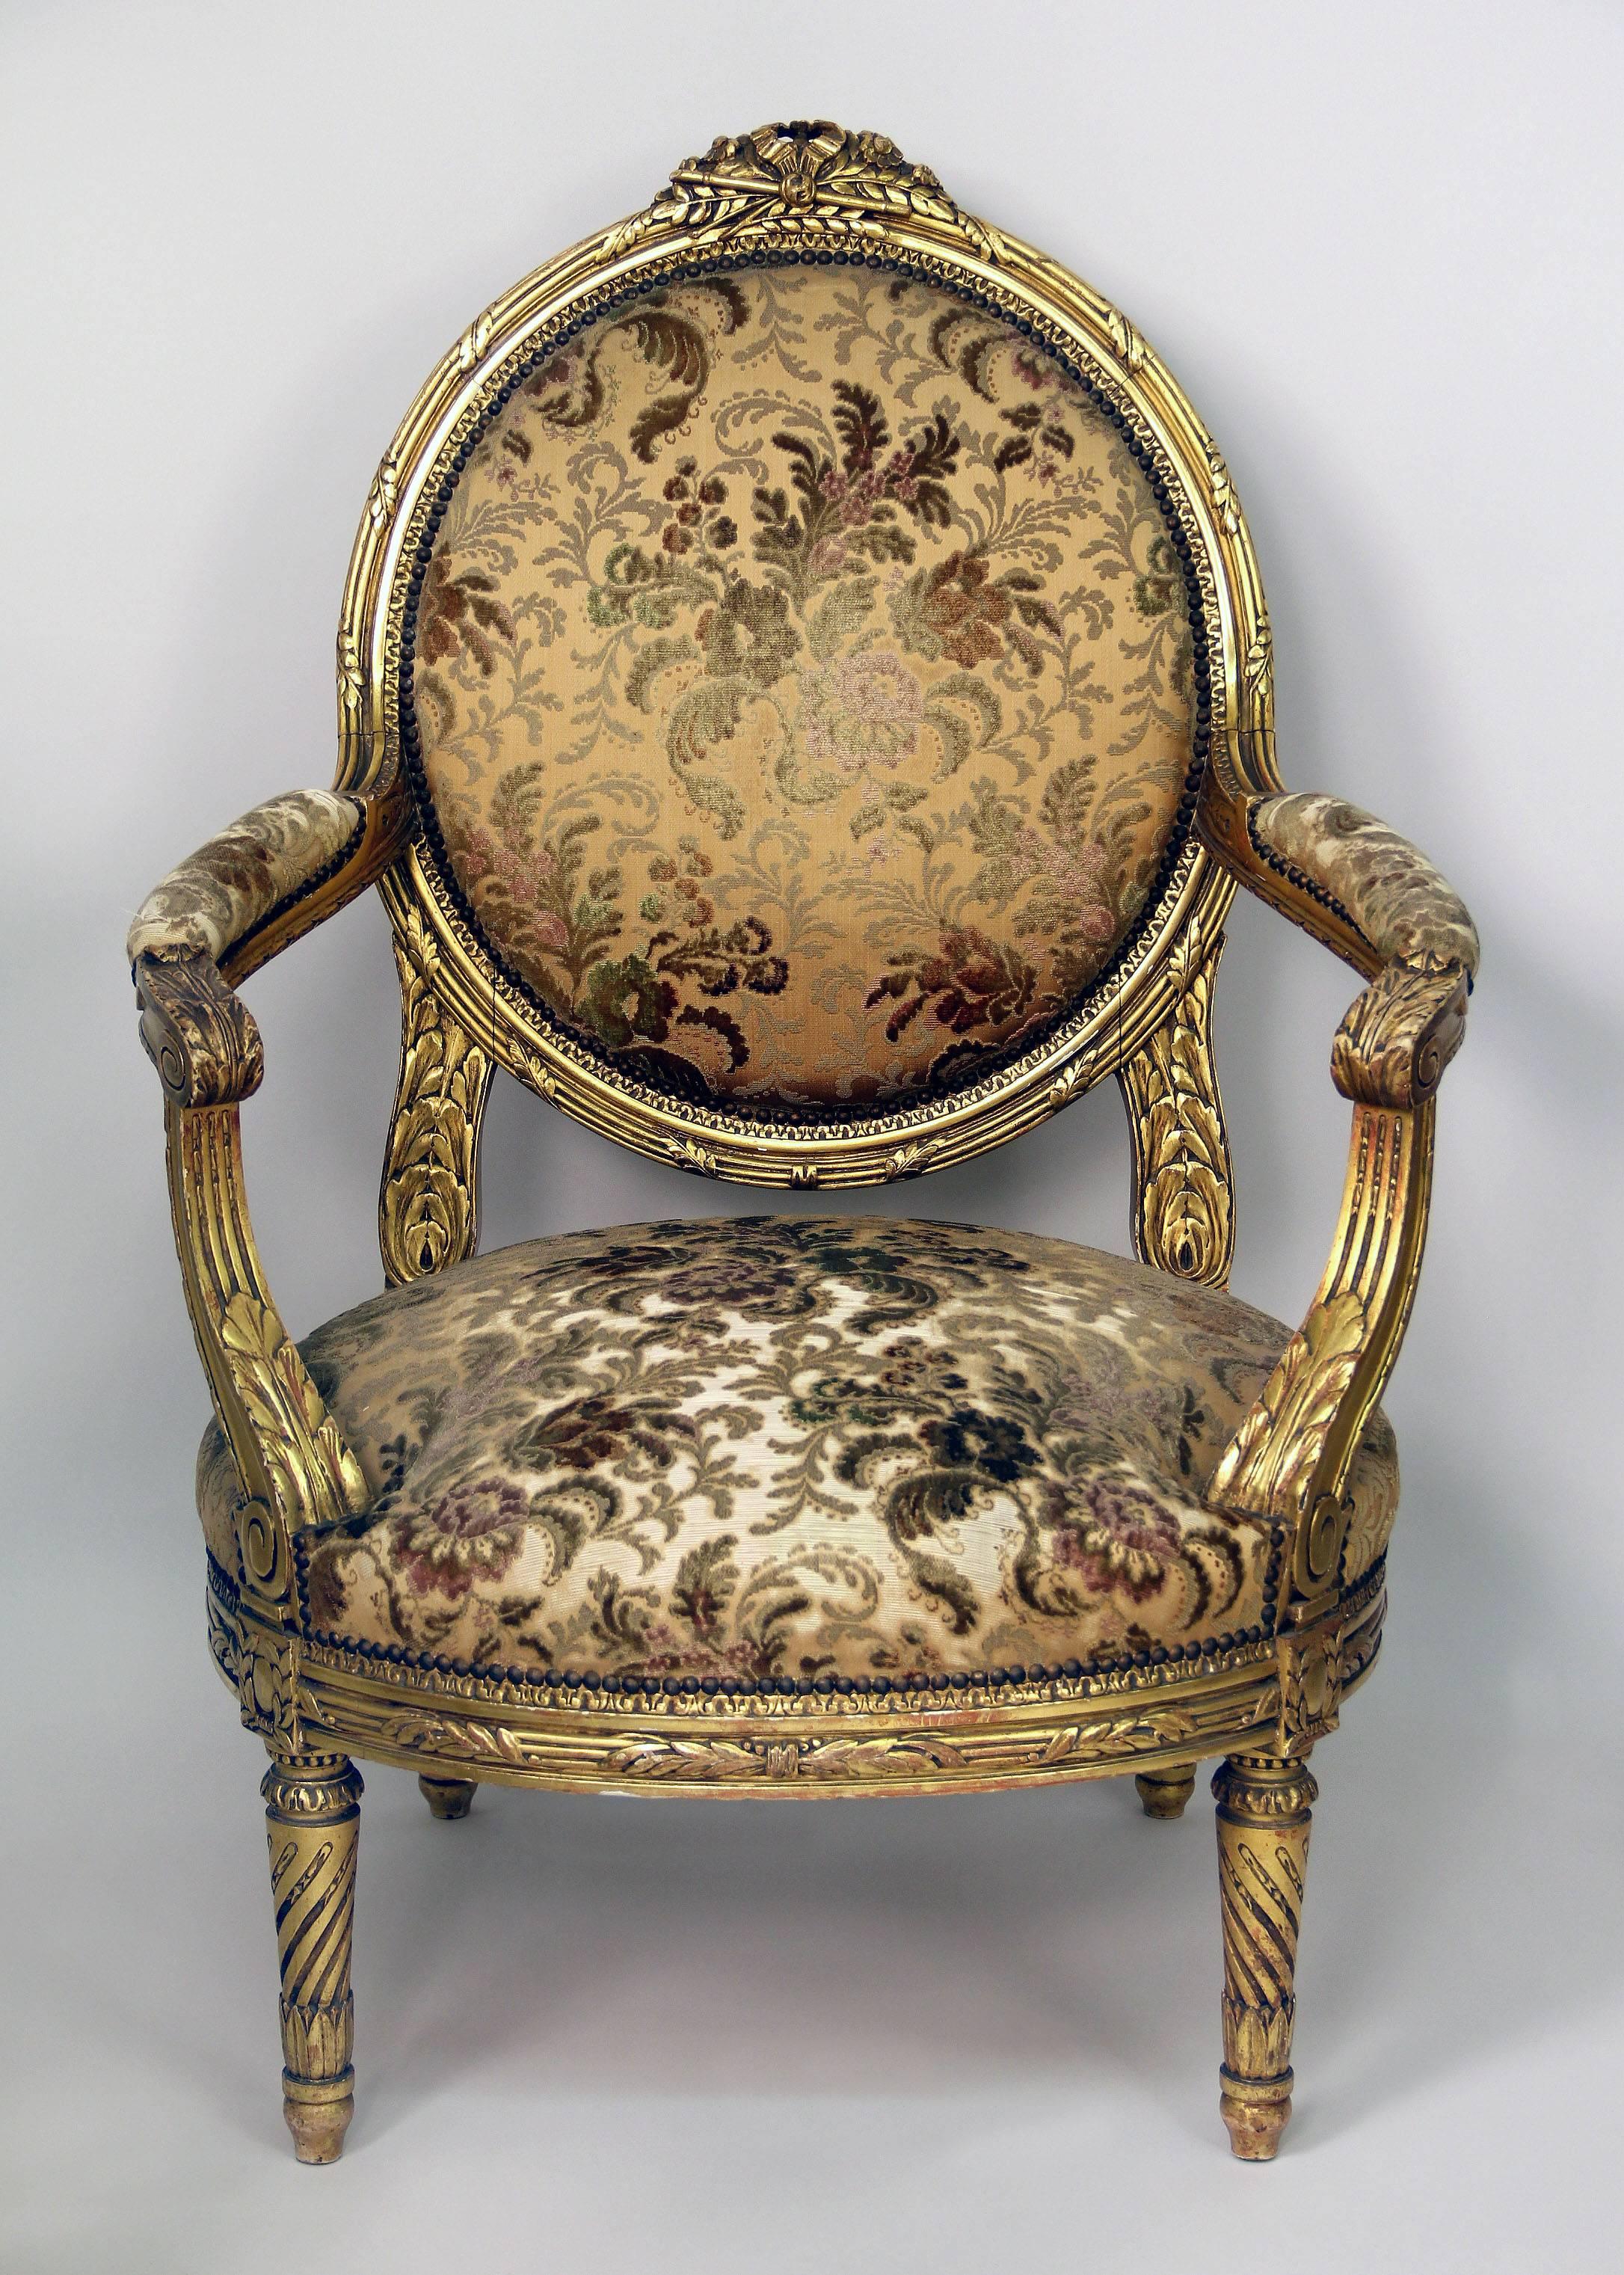 An important set of four late 19th century Louis XVI style giltwood armchairs

Oversized with high backs, wonderful hand-carved designed frames.